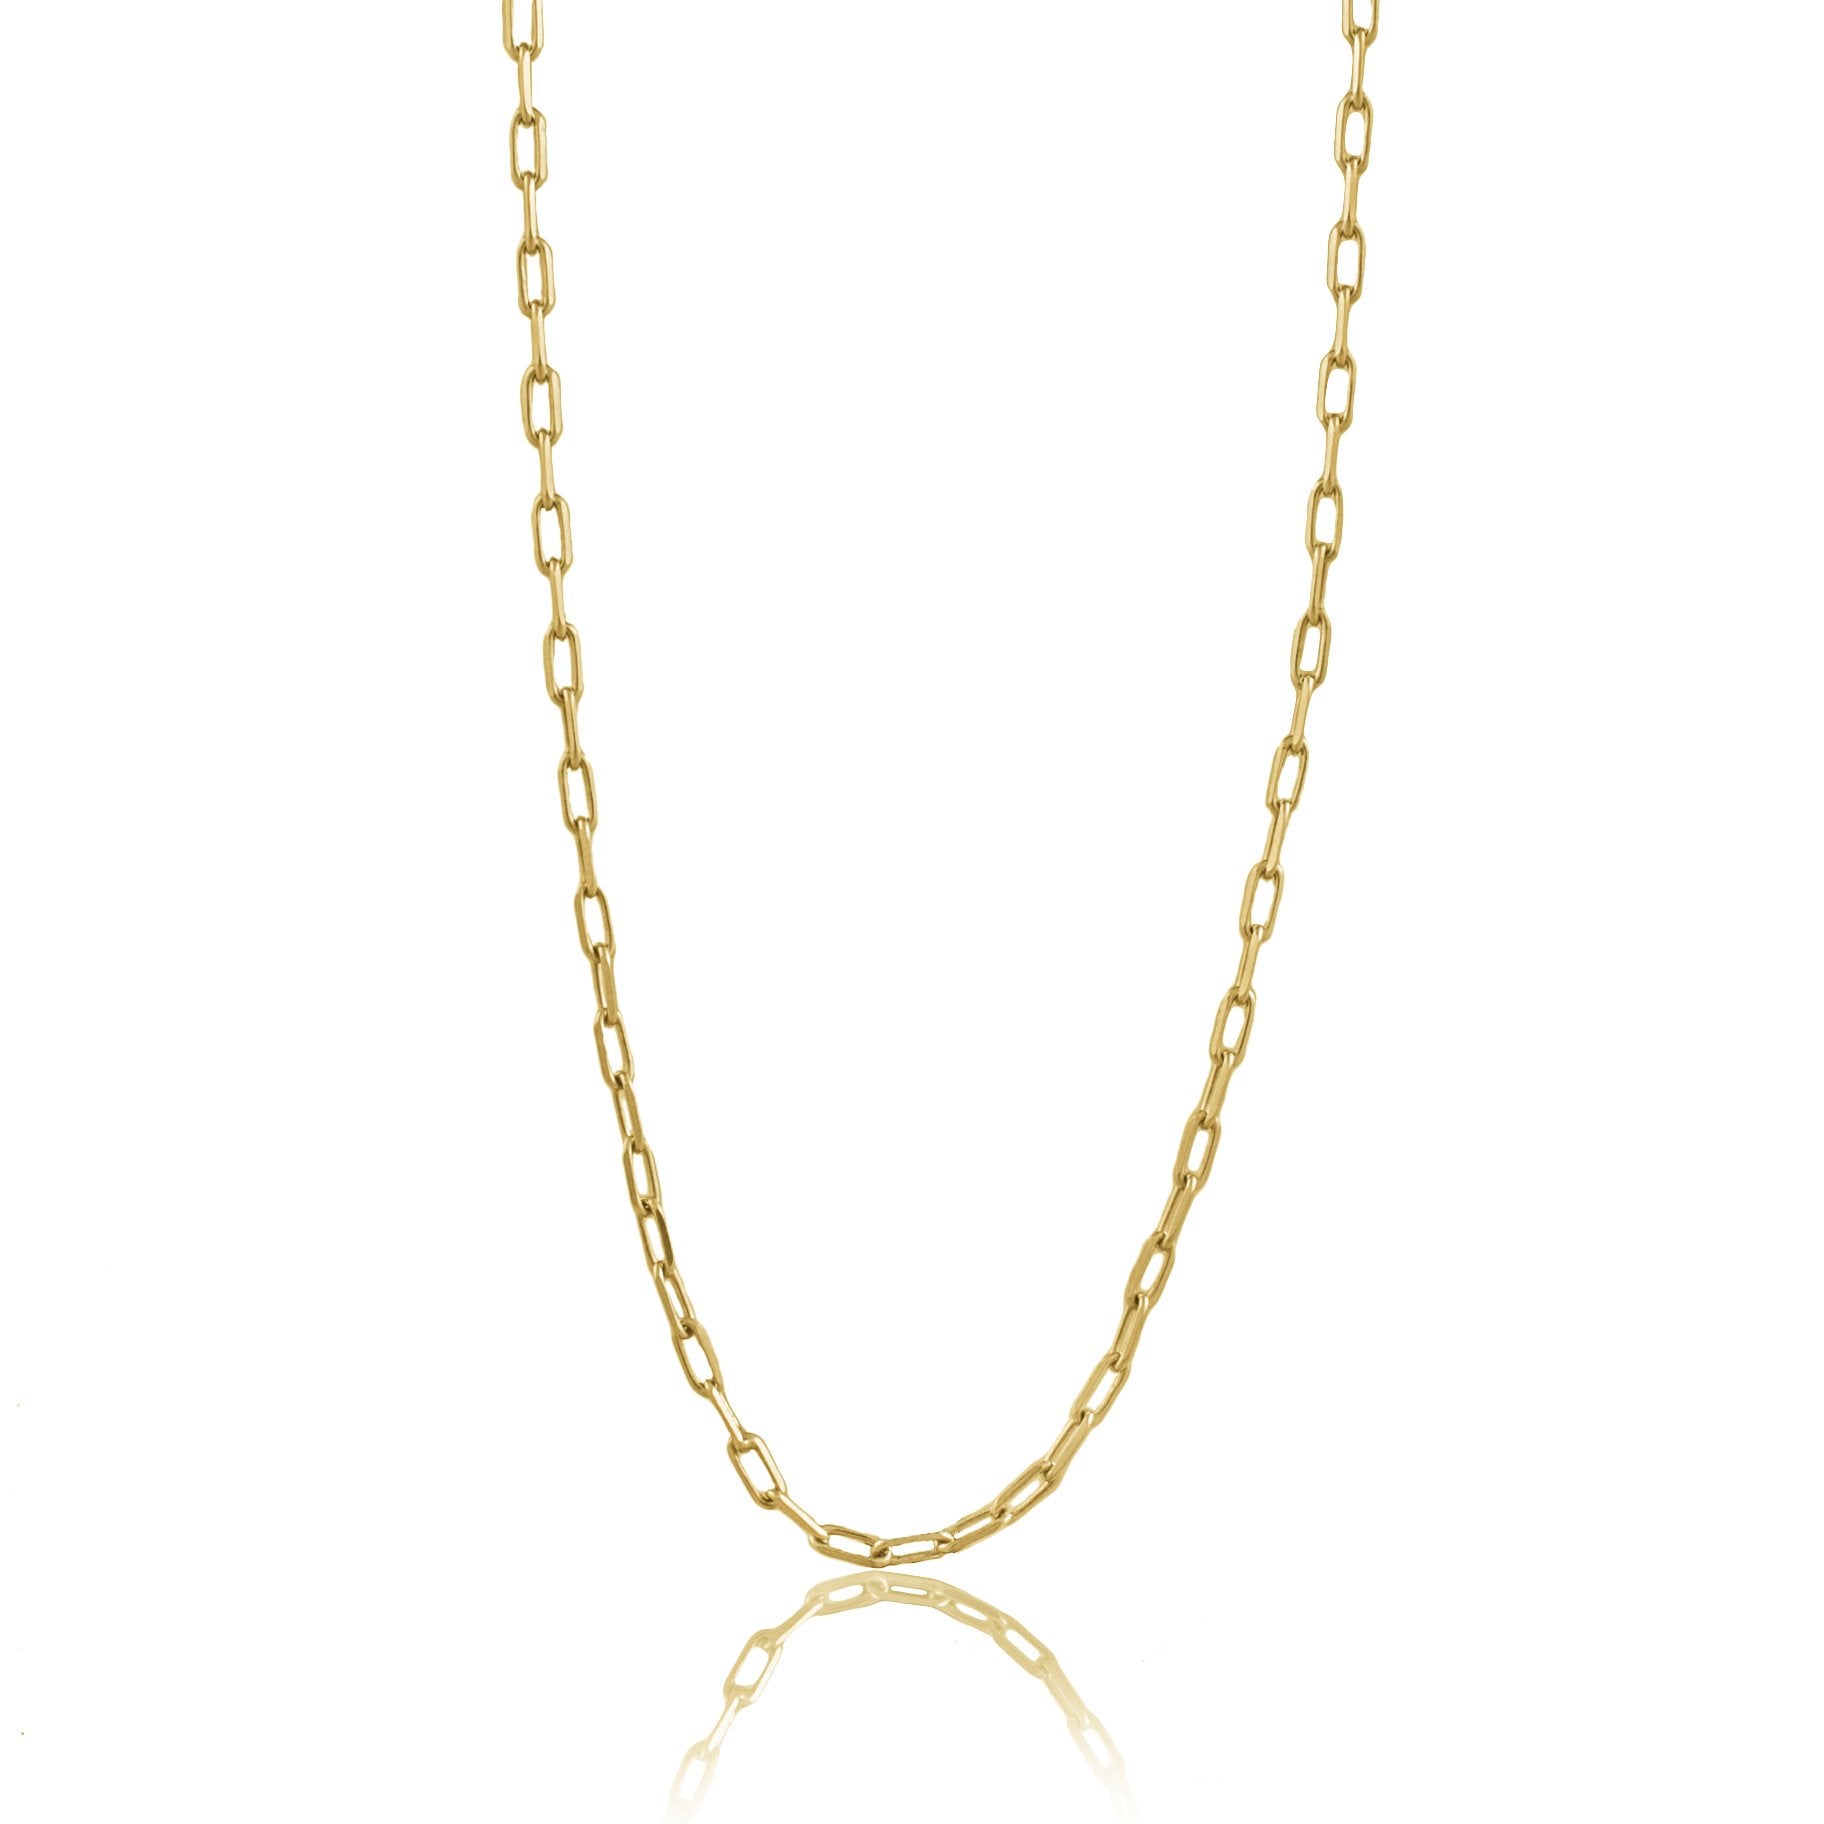 Luna & Rose Long Beach Link Chain - Gold from Recycled Sterling Silver